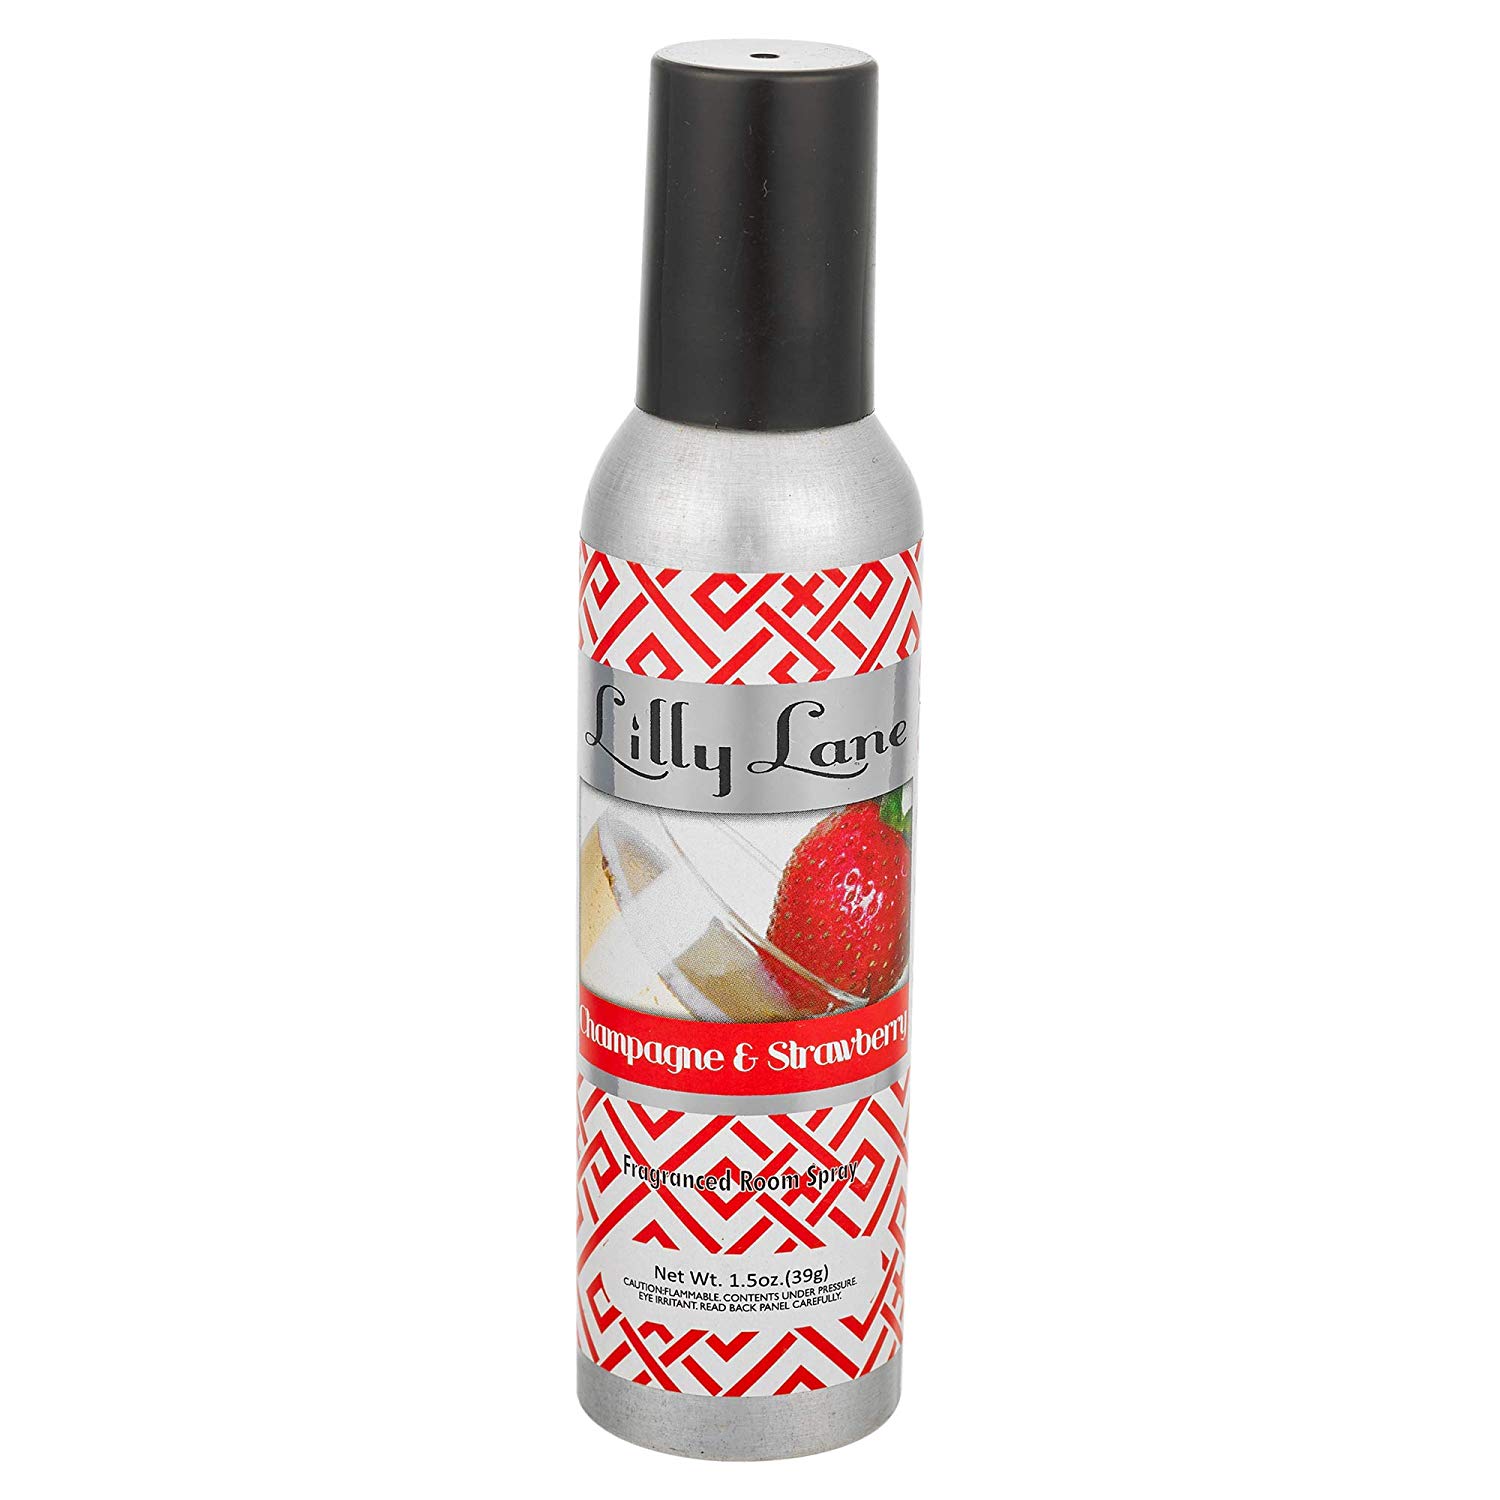 Lilly Lane Champagne and Strawberry Room Spray